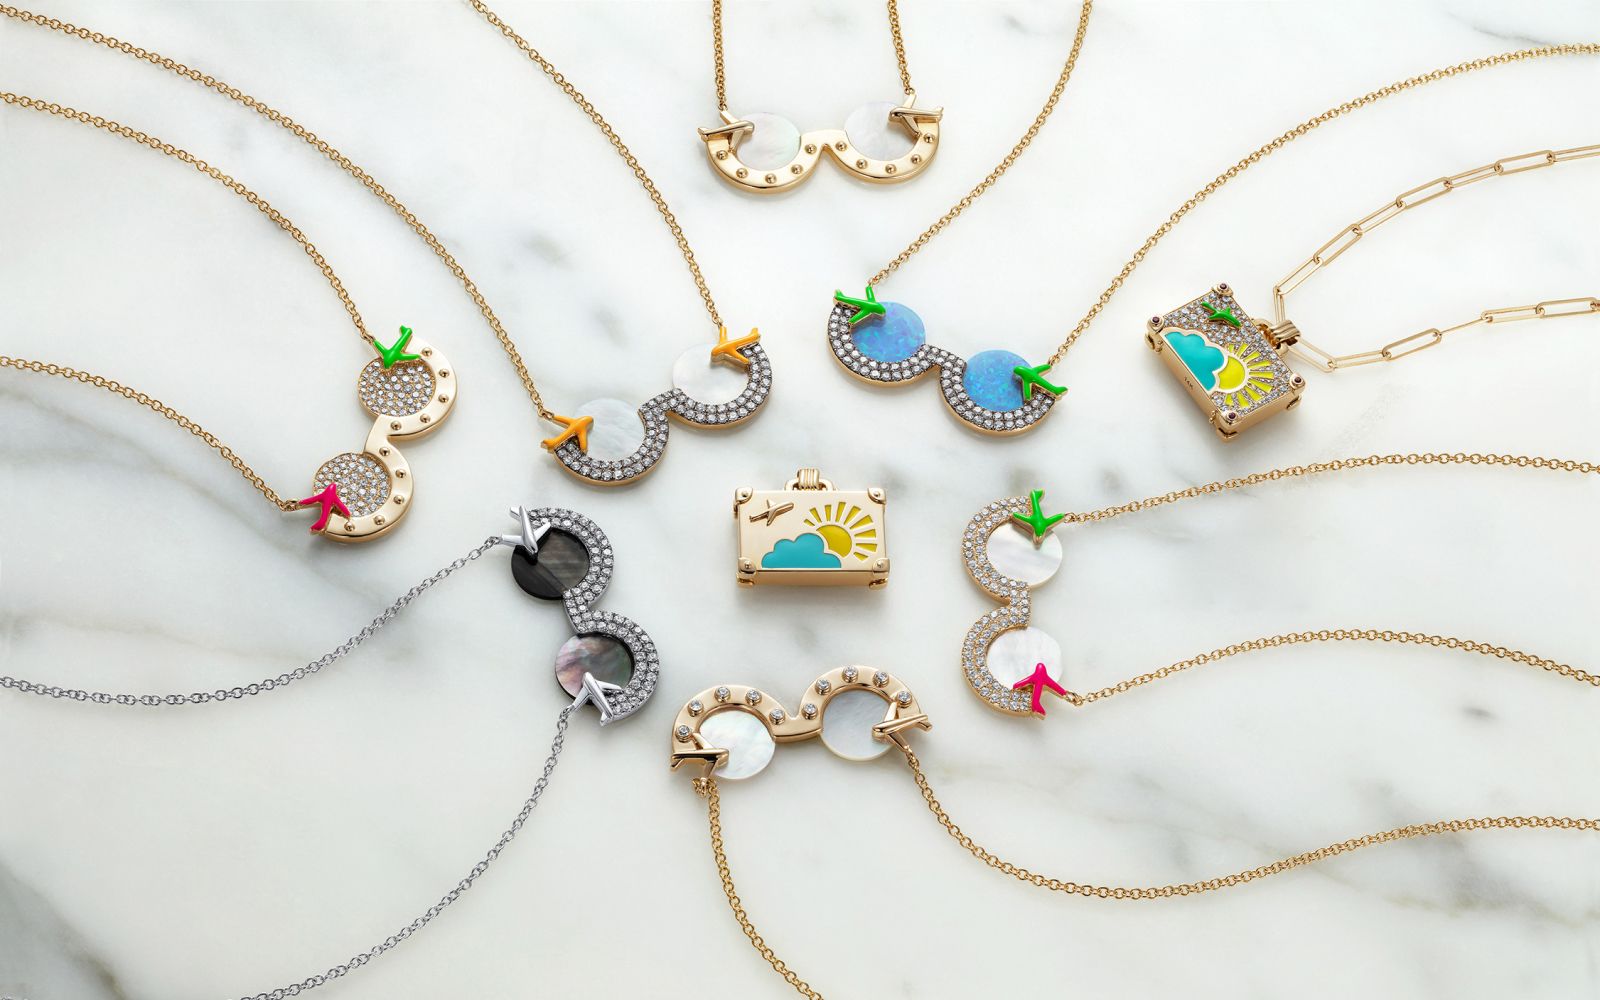 NeverNoT necklaces in gold, white gold, mother of pearl, enamel, opal and diamond from the Travel collection